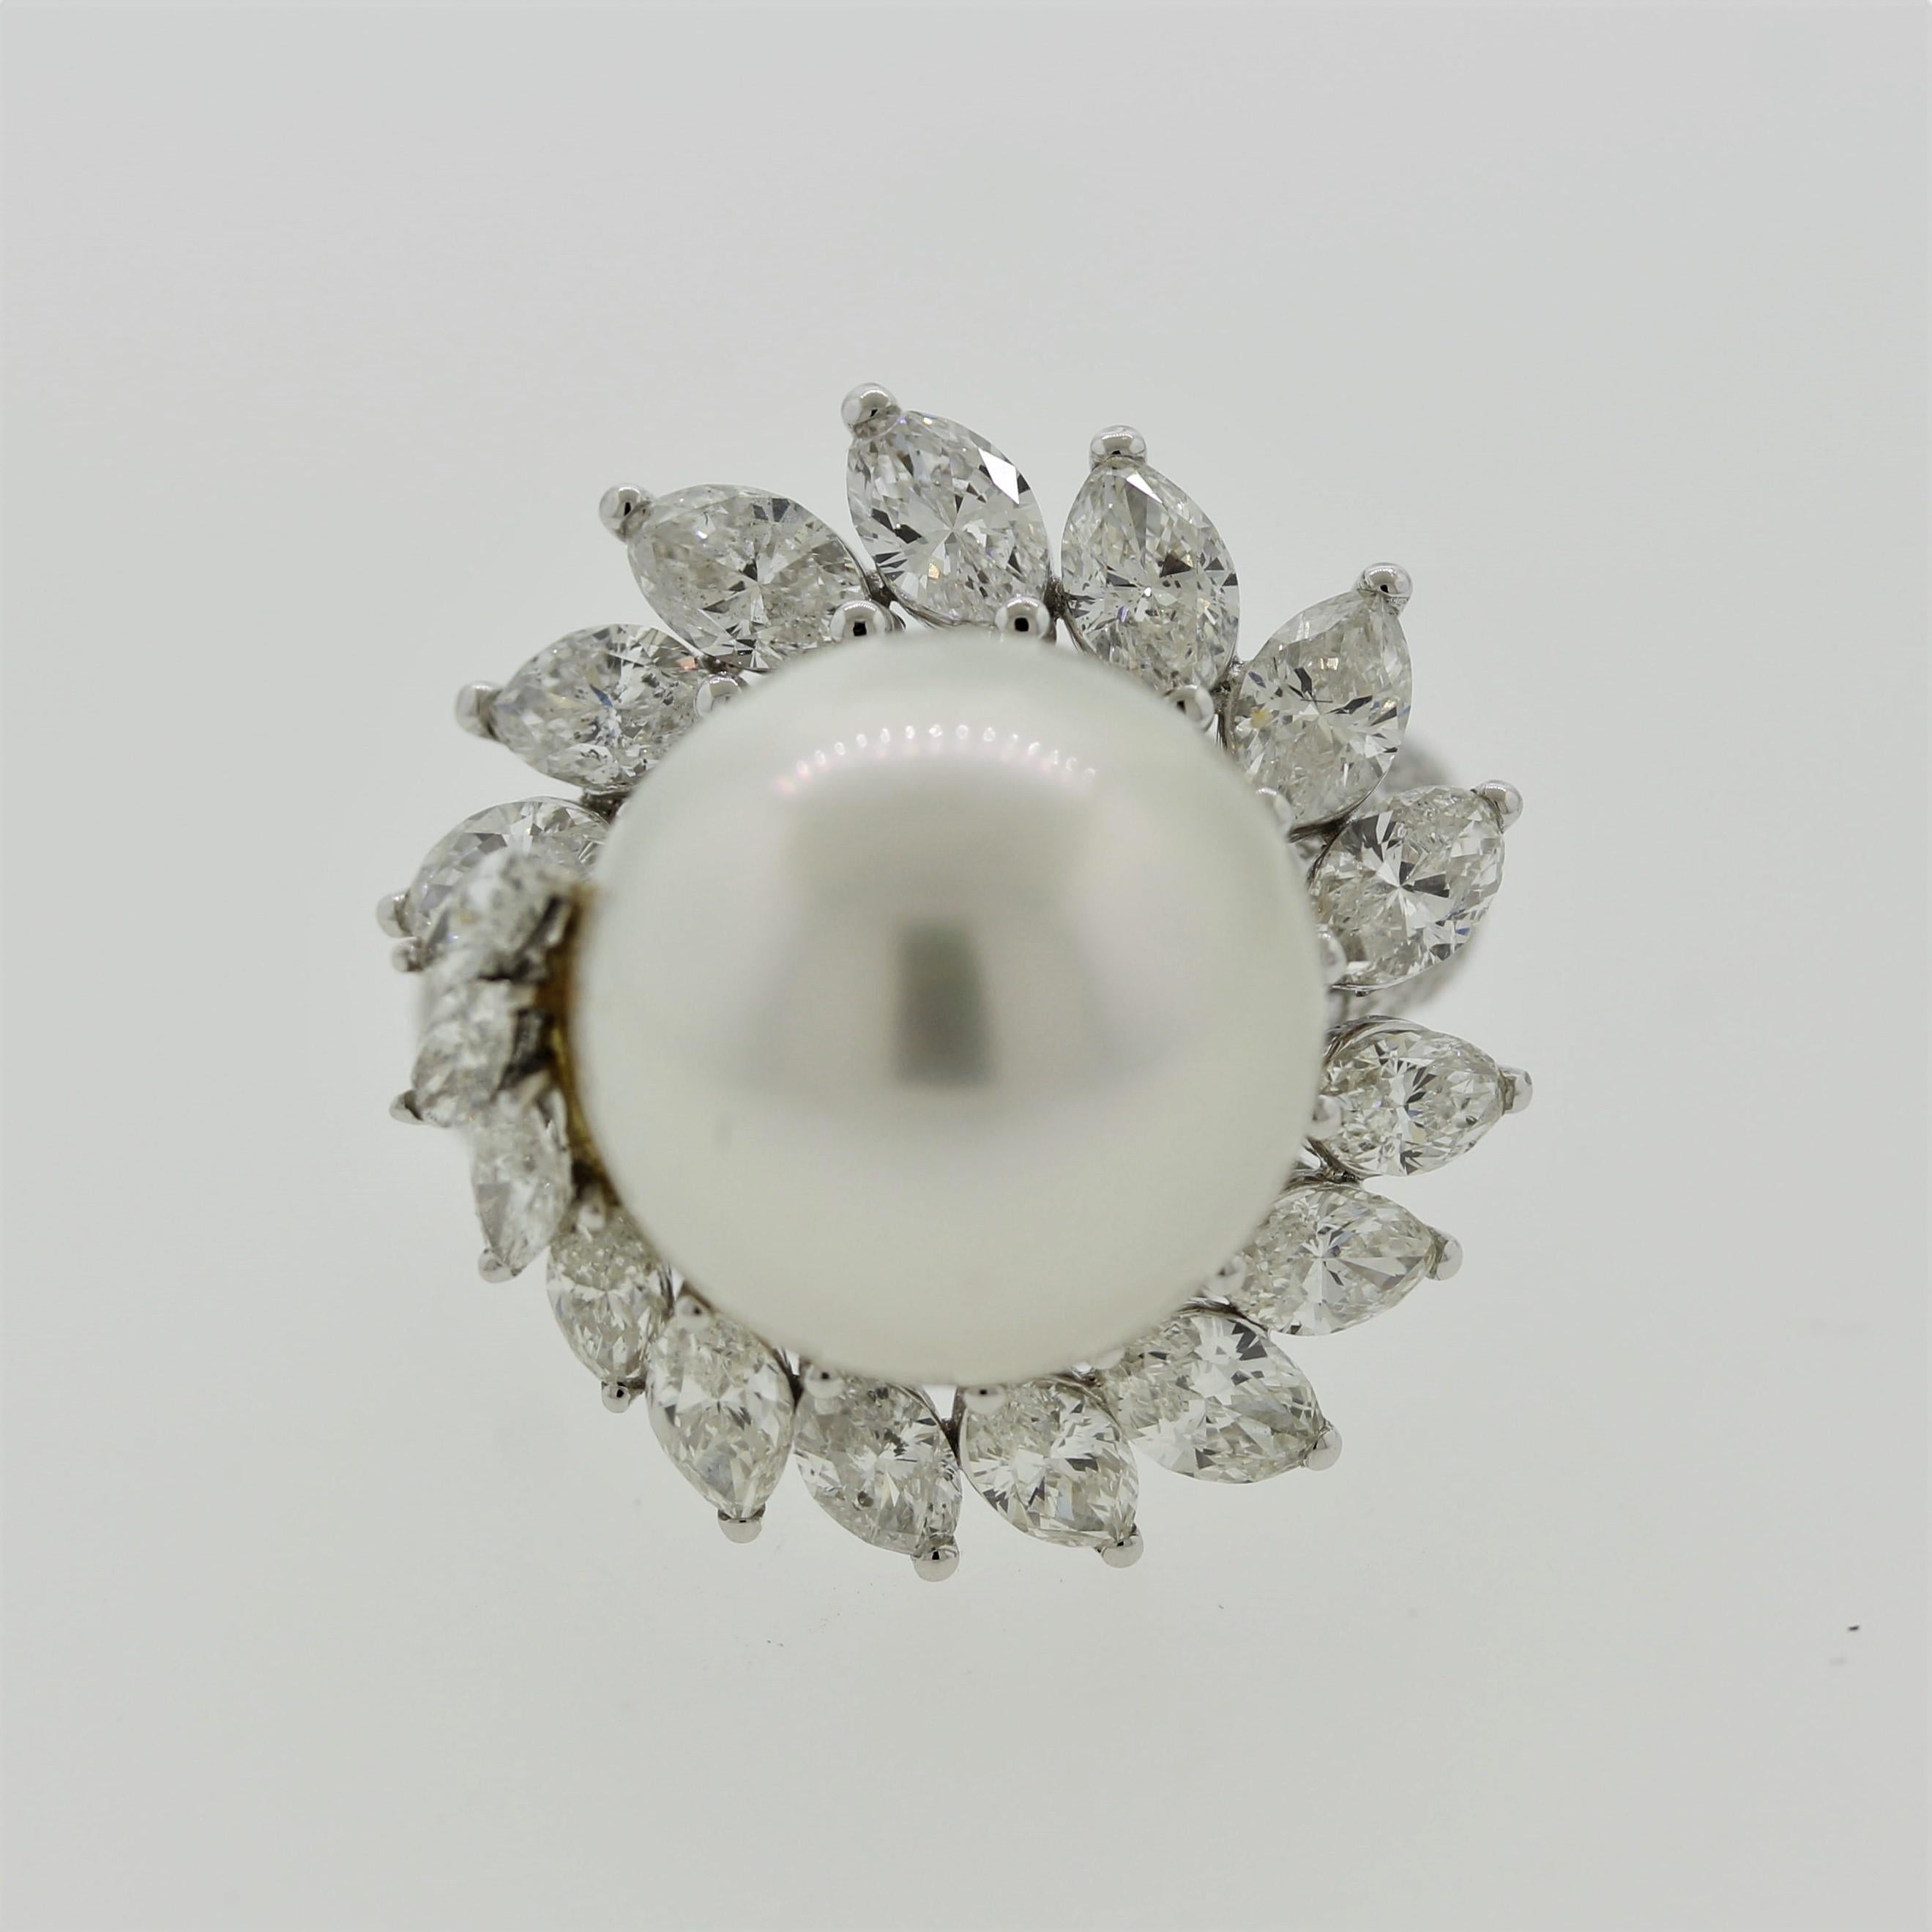 A dazzling cocktail ring featuring a 15mm south sea pearl with a soft pink overtone. It is complemented by a swirl of large pear-shape diamonds running around the pearl along with round brilliant-cuts pave-set down the shoulders of the ring,